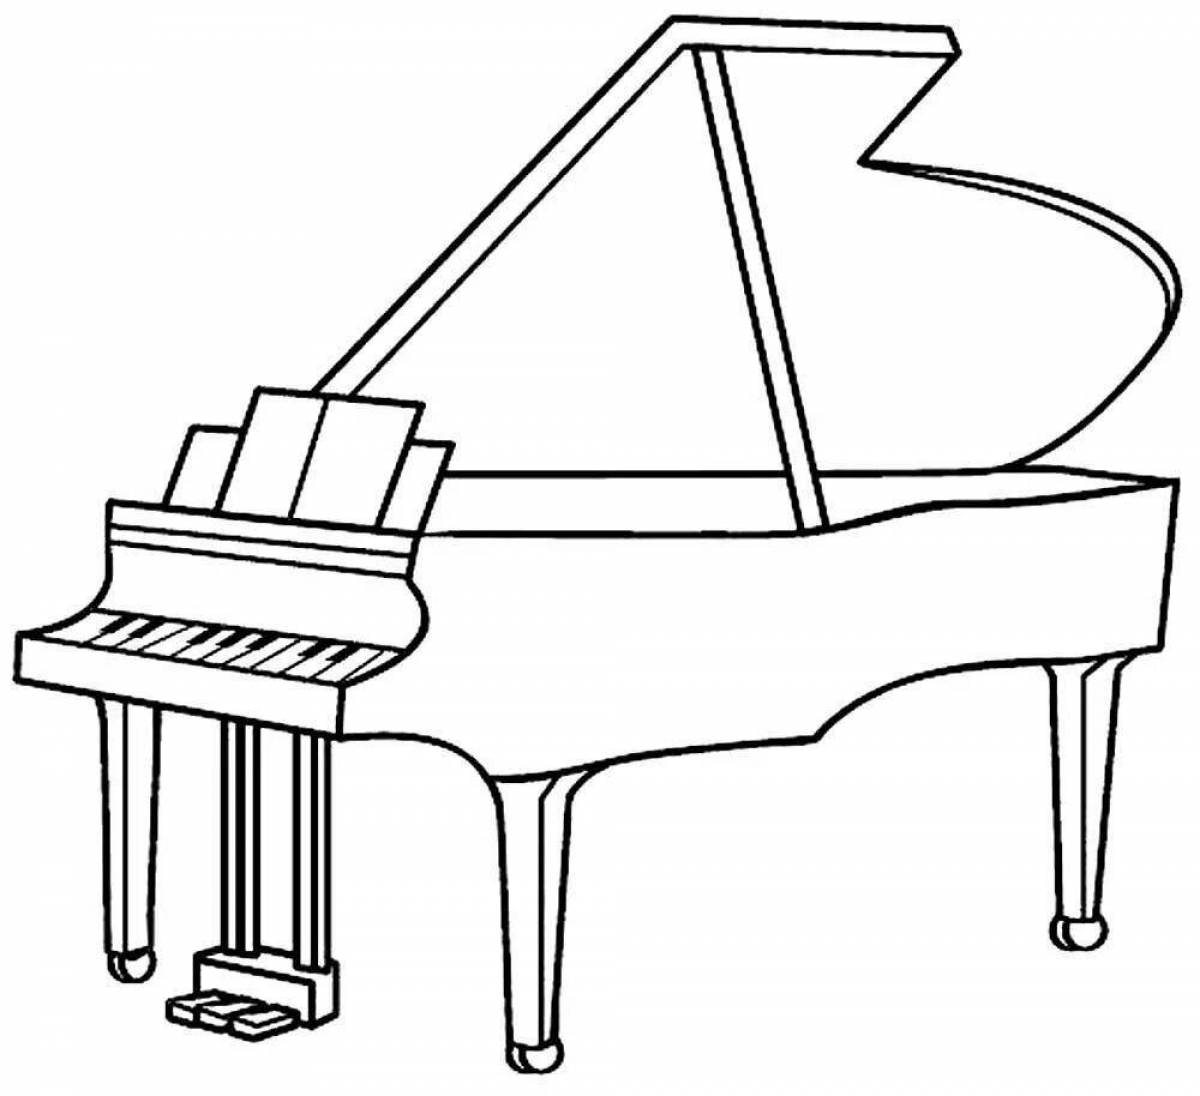 Favorite piano coloring page